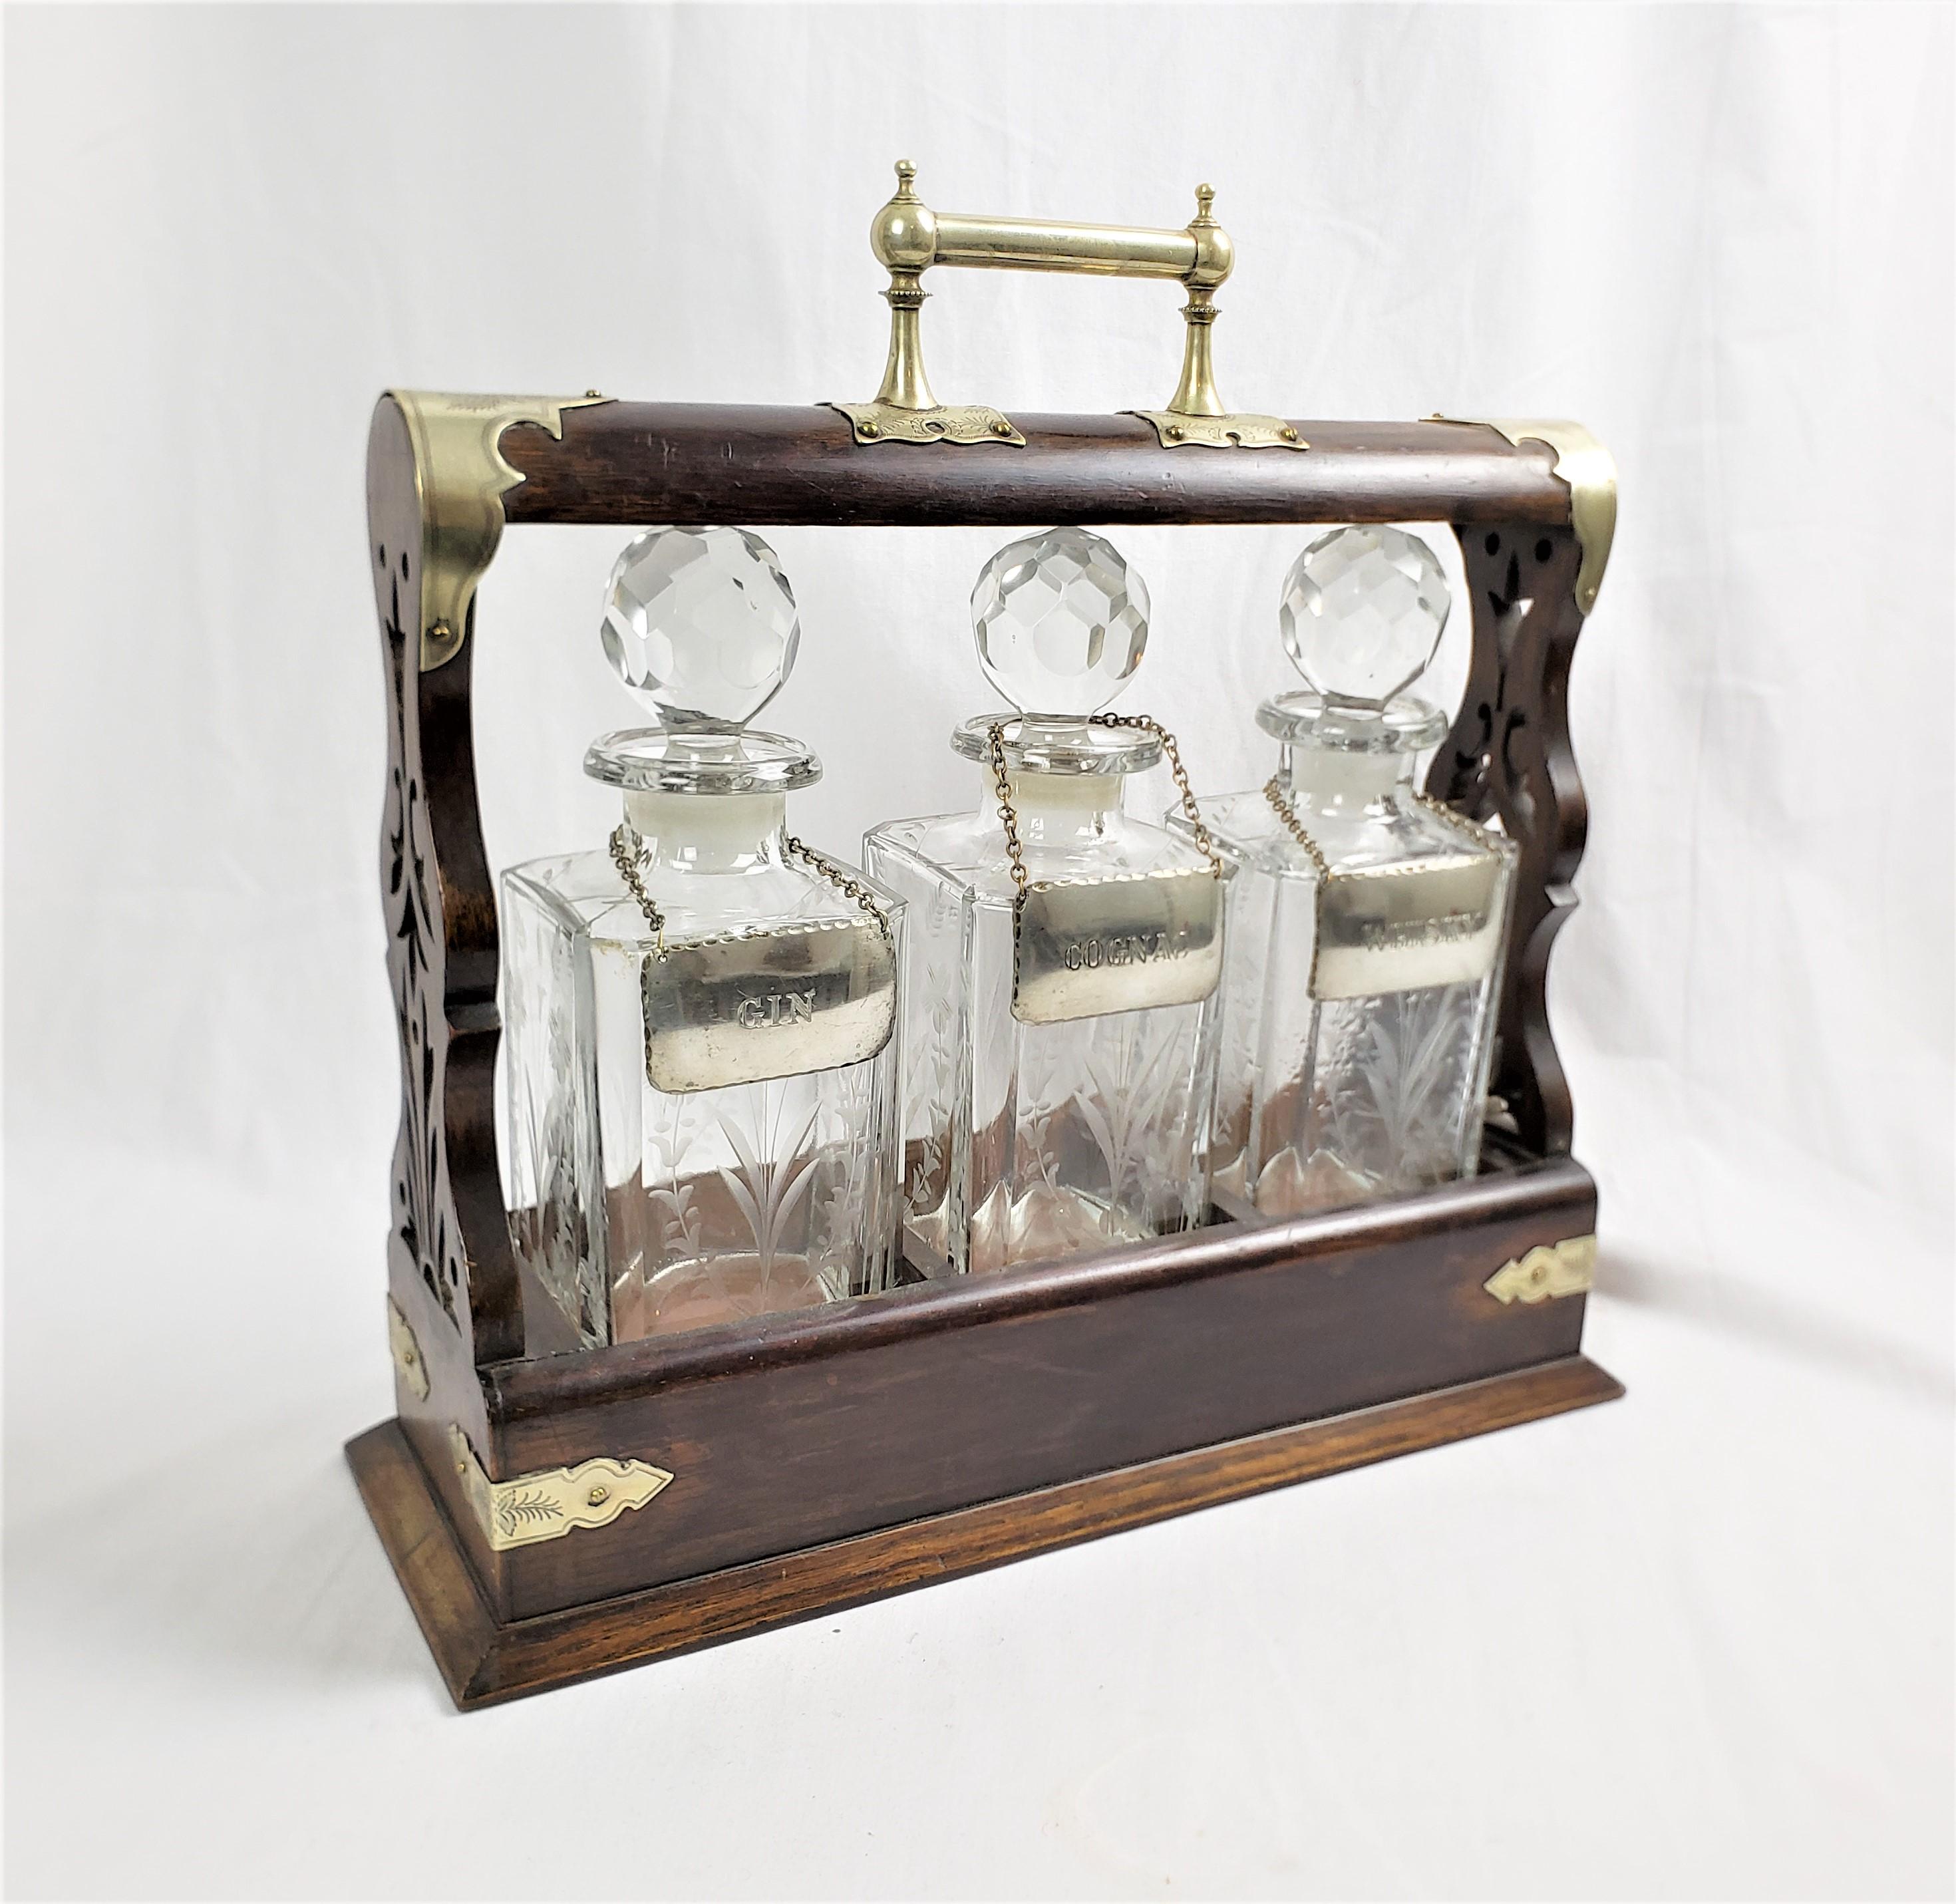 Edwardian Antique English Three Bottle Oak Tantalus with Etched Floral & Engraved Accents For Sale